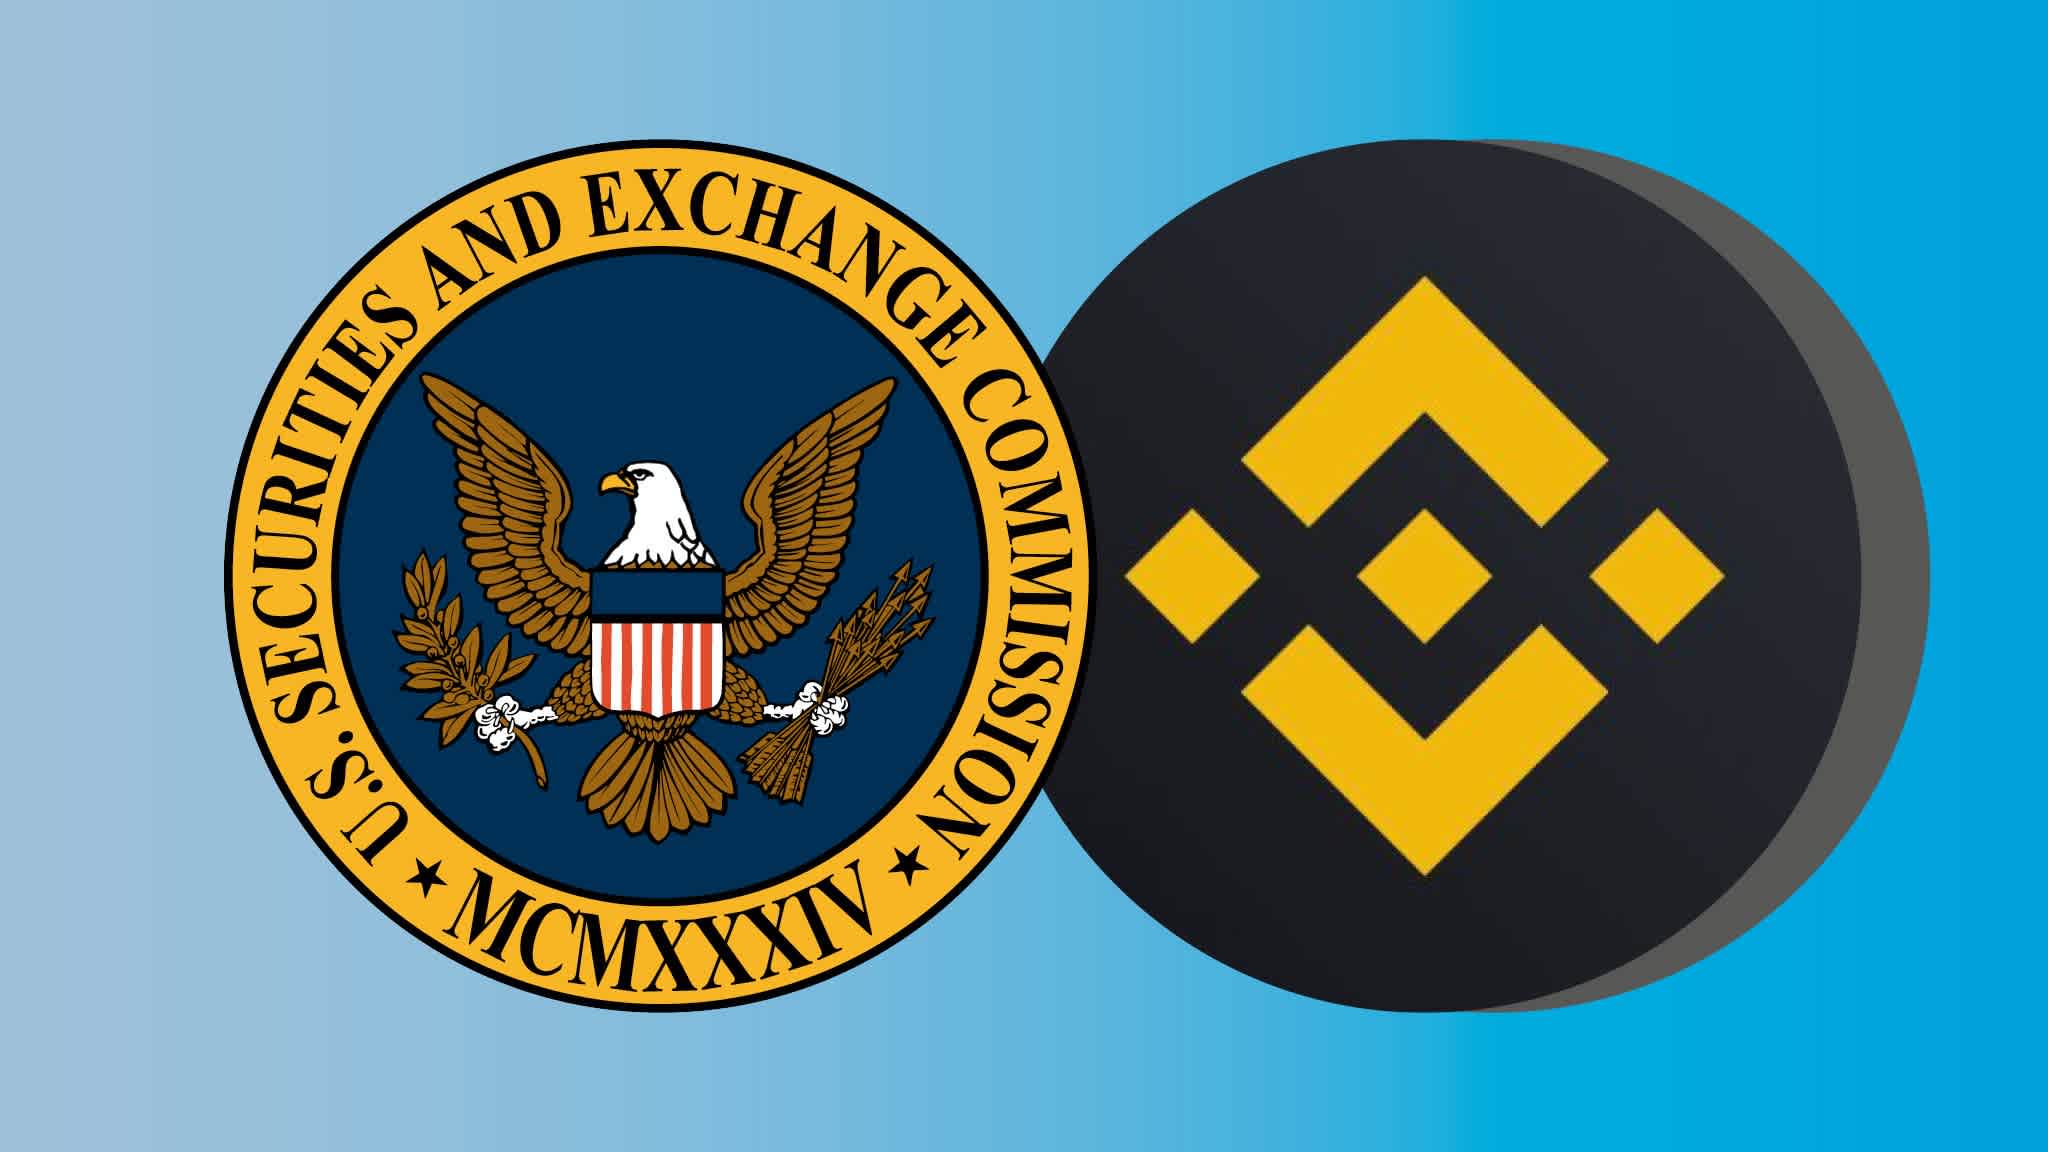 SEC hones in on secretive trading arms controlled by Binance chief